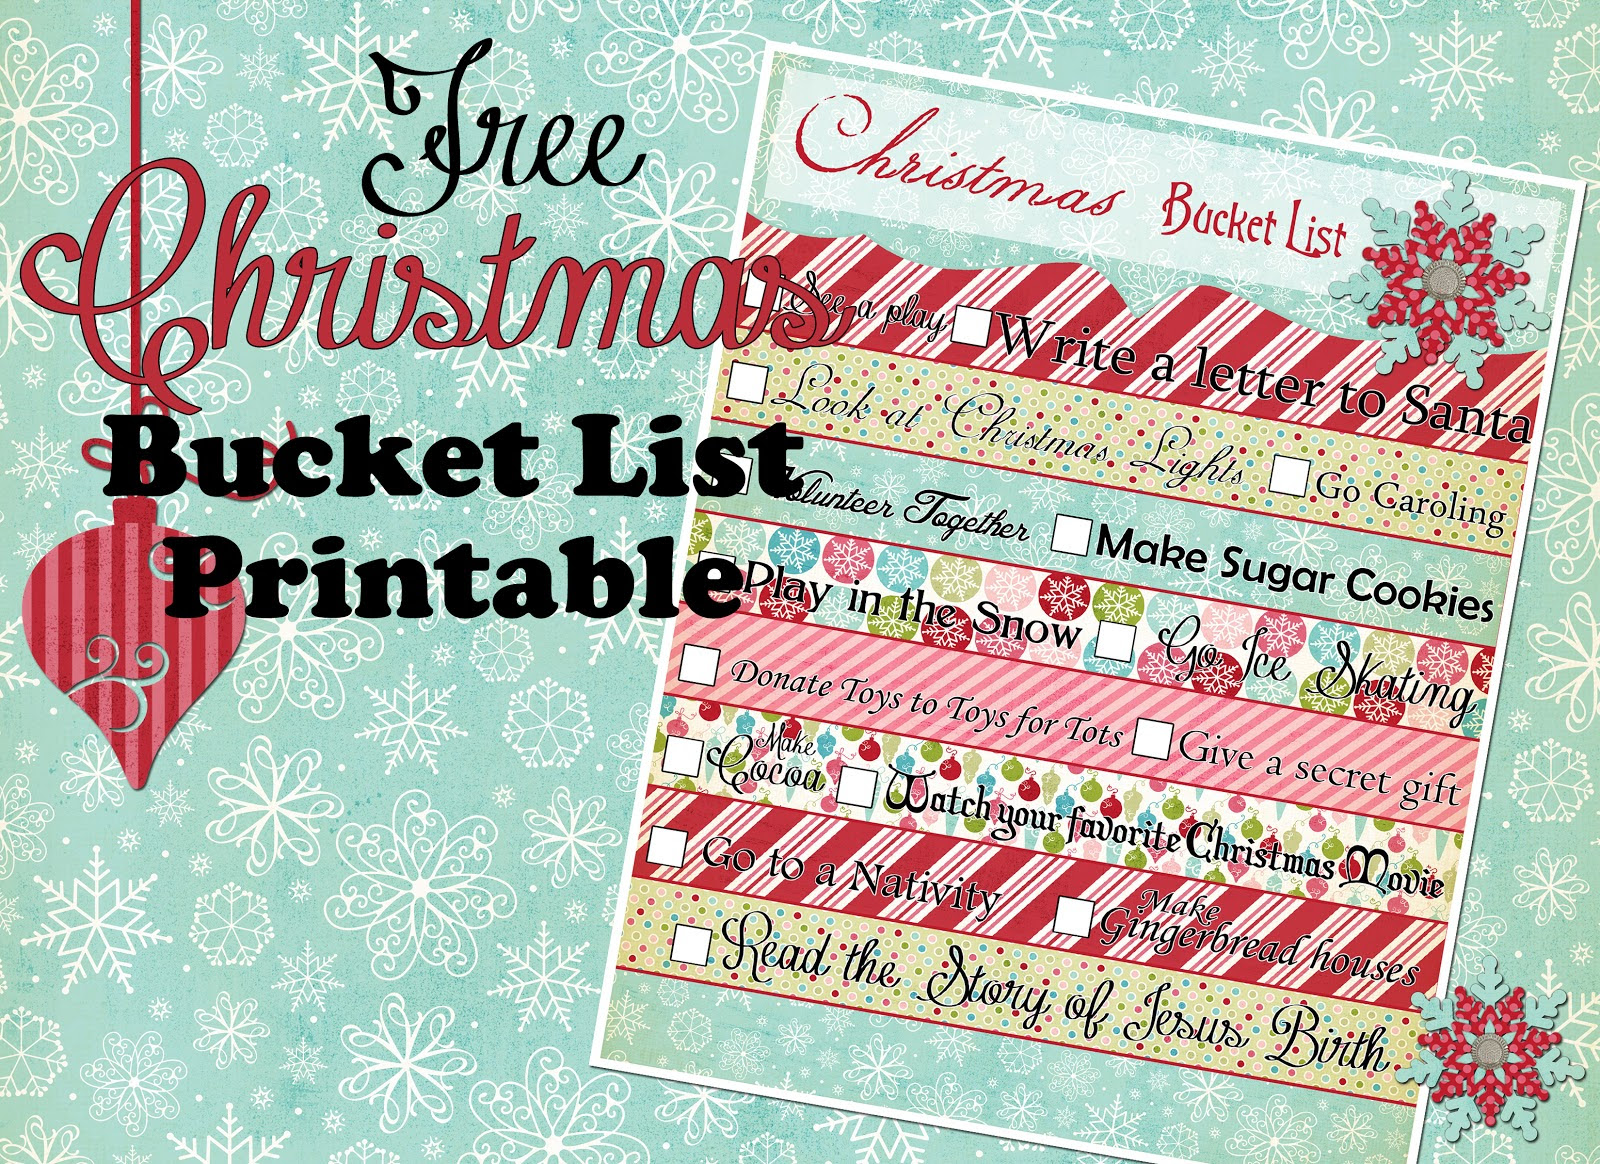 {Christmas Bucket List} Free Printable! Tips from a Typical Mom